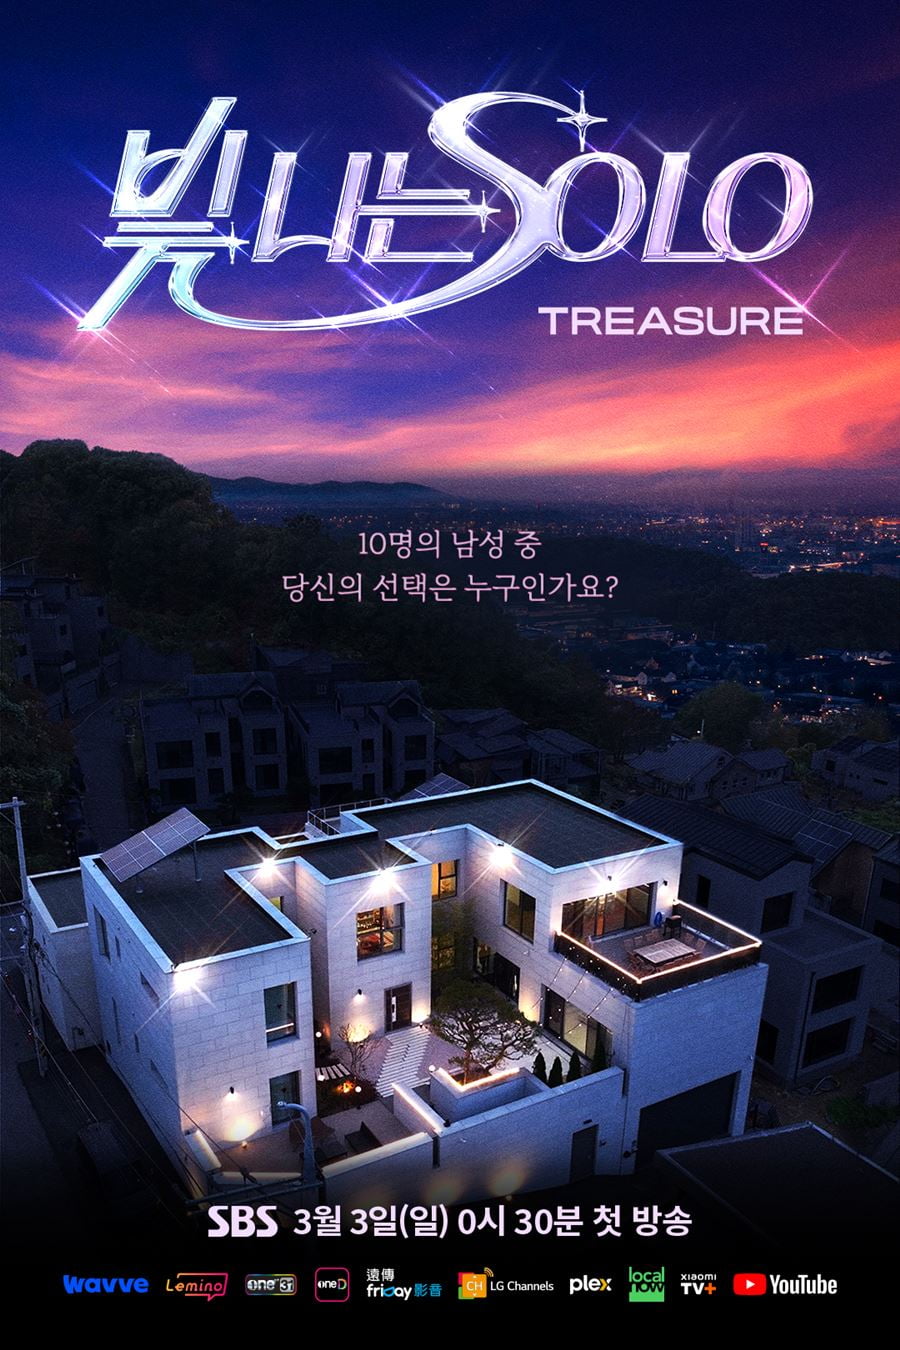 TREASURE unveils 2nd poster for new project 'Shining SOLO'